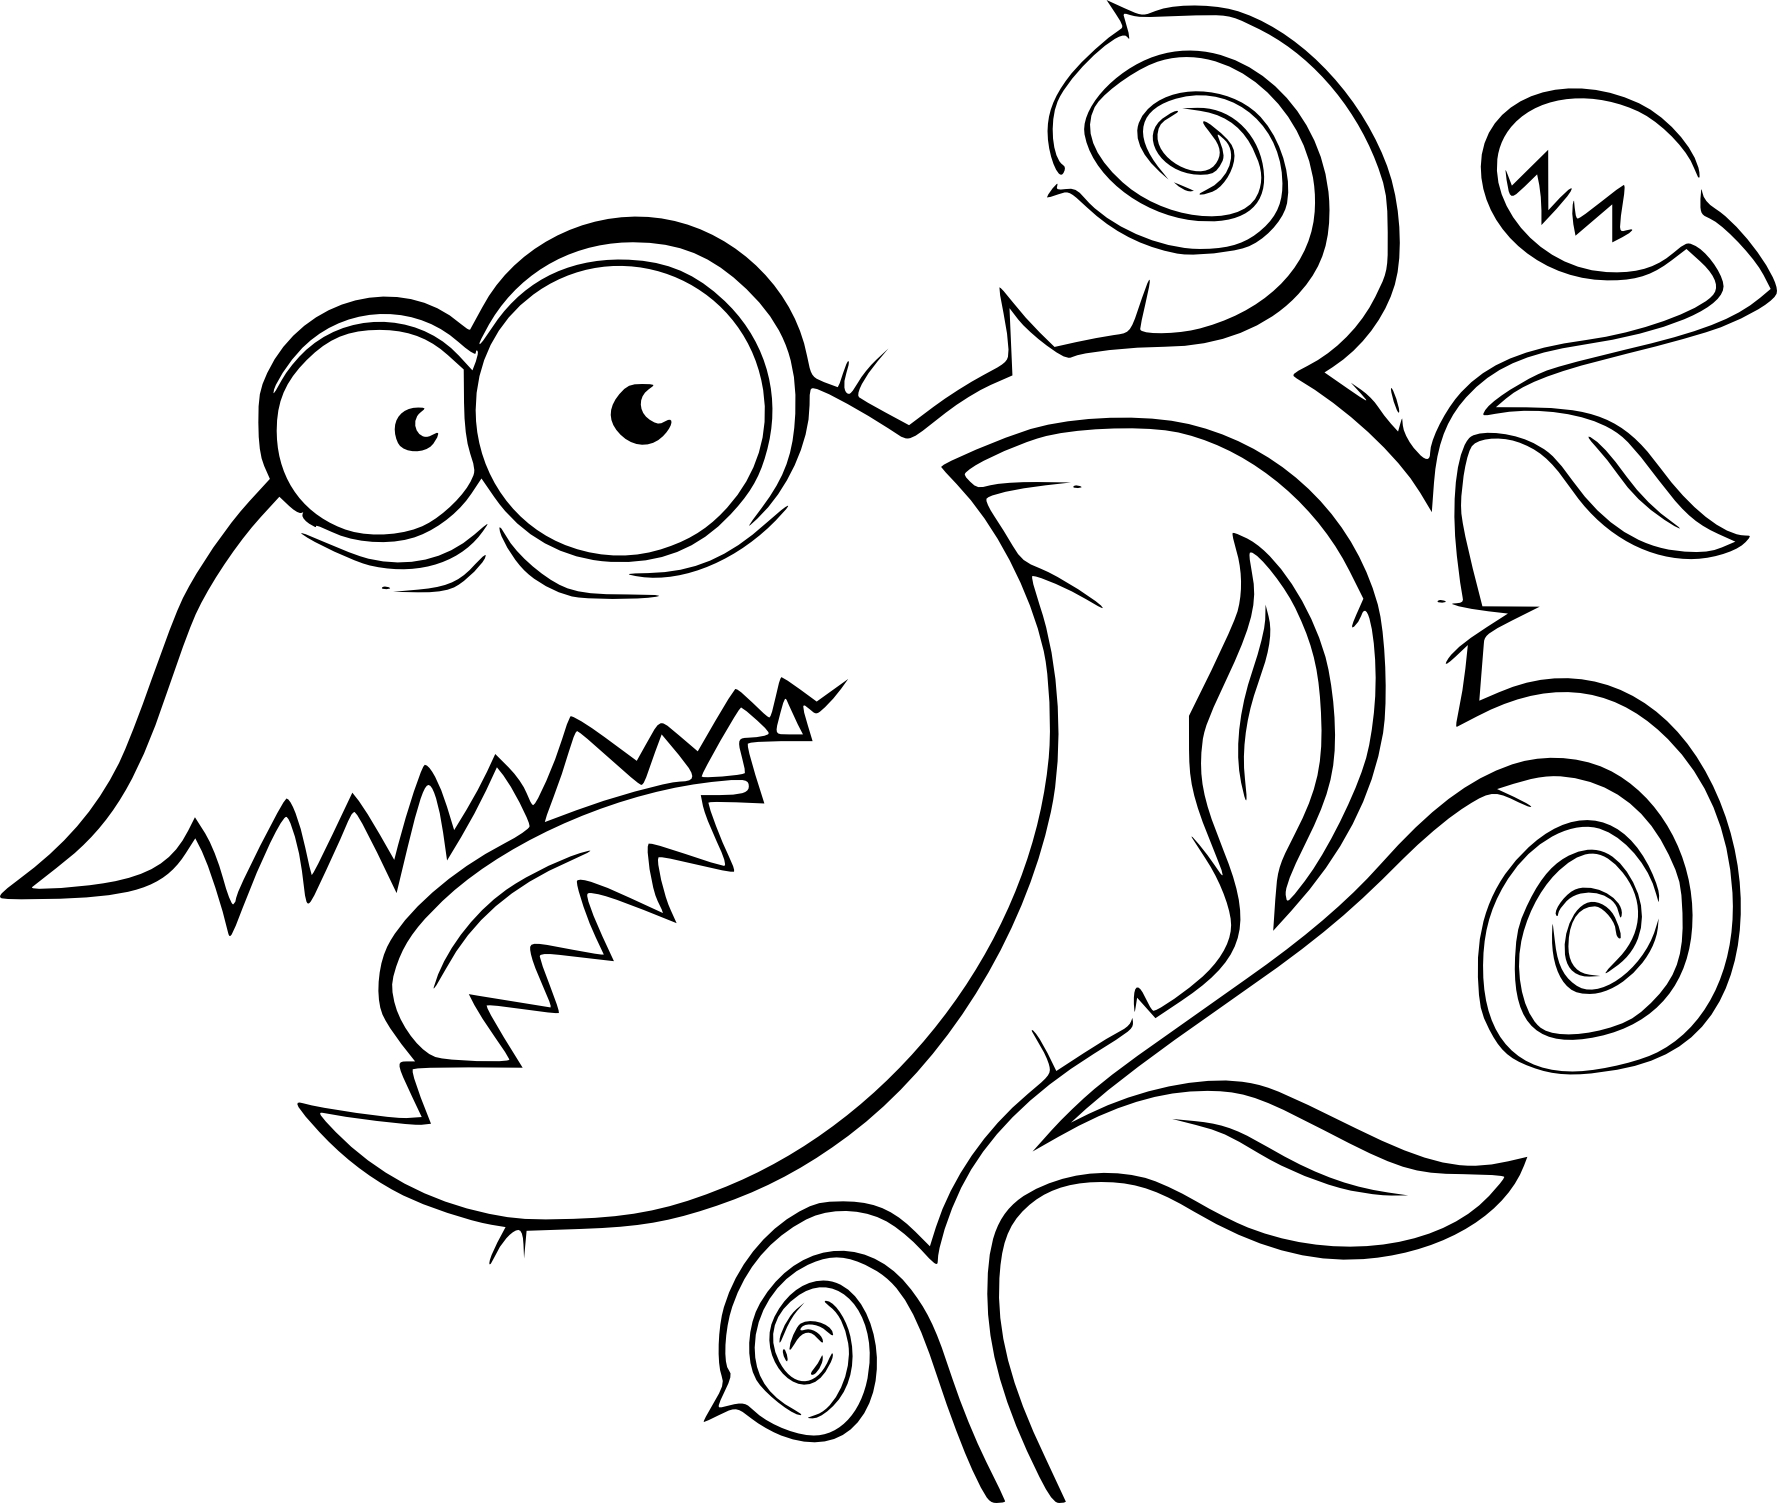 Carnivorous Plant coloring page